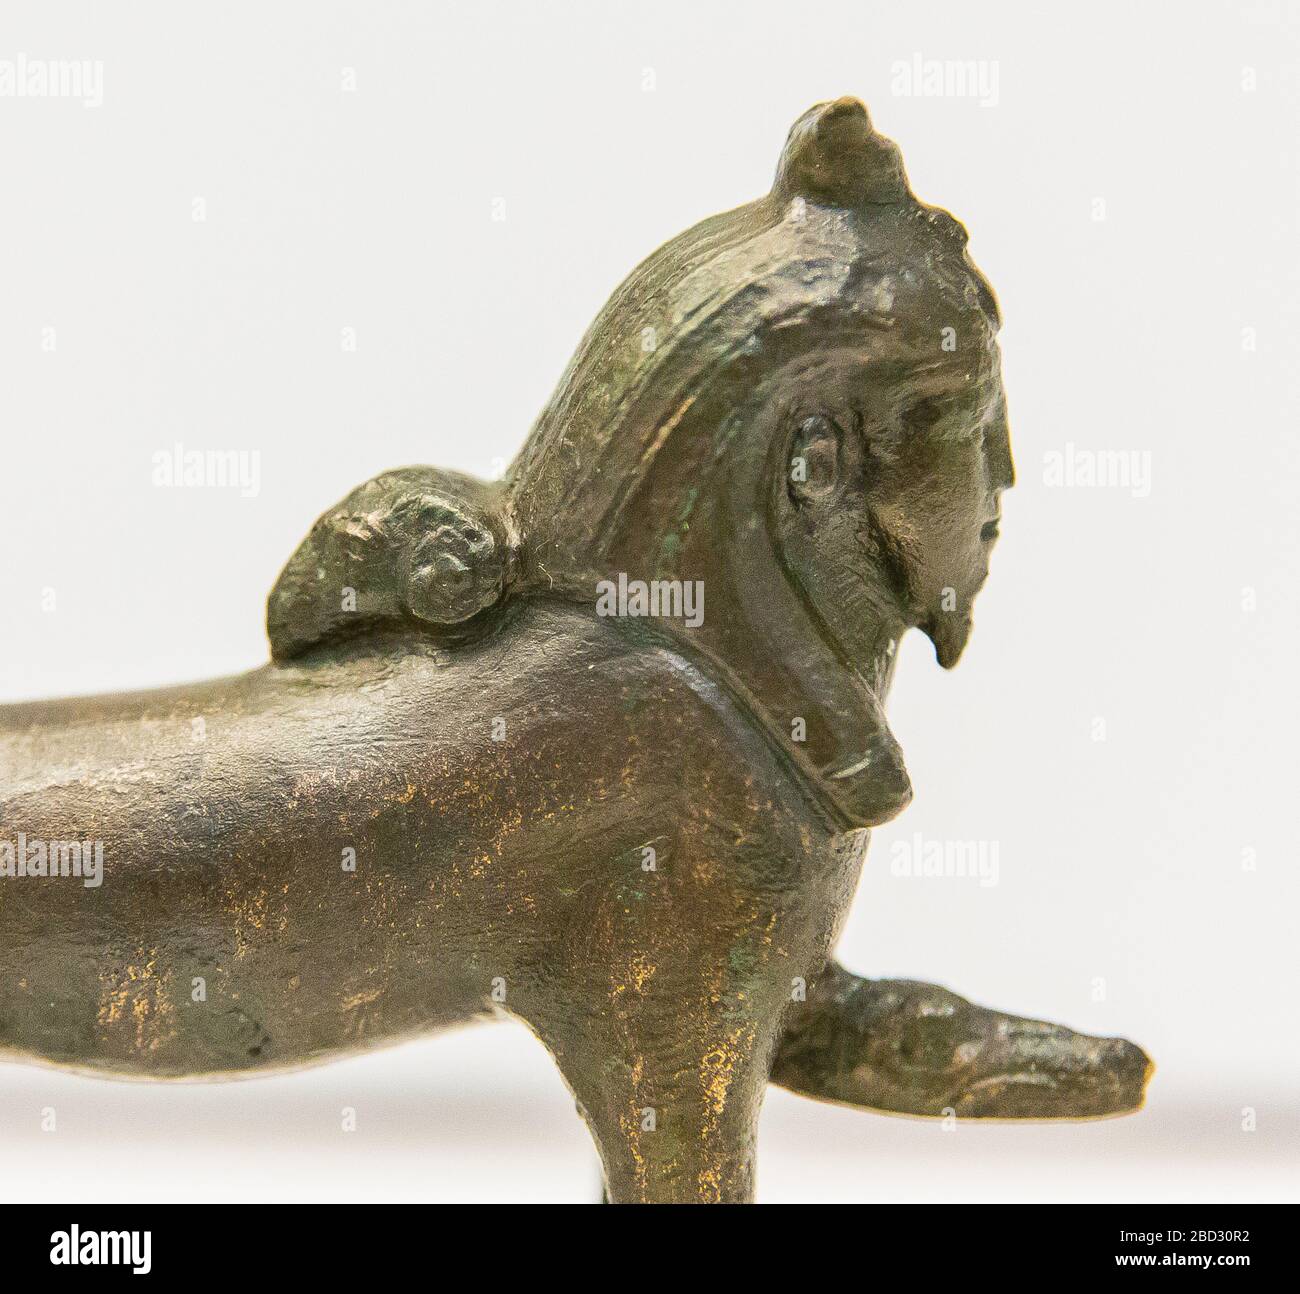 Exhibition 'The animal kingdom in Ancient Egypt', Louvre-Lens museum. God Tutu, Late Period, copper, E 11600. Stock Photo